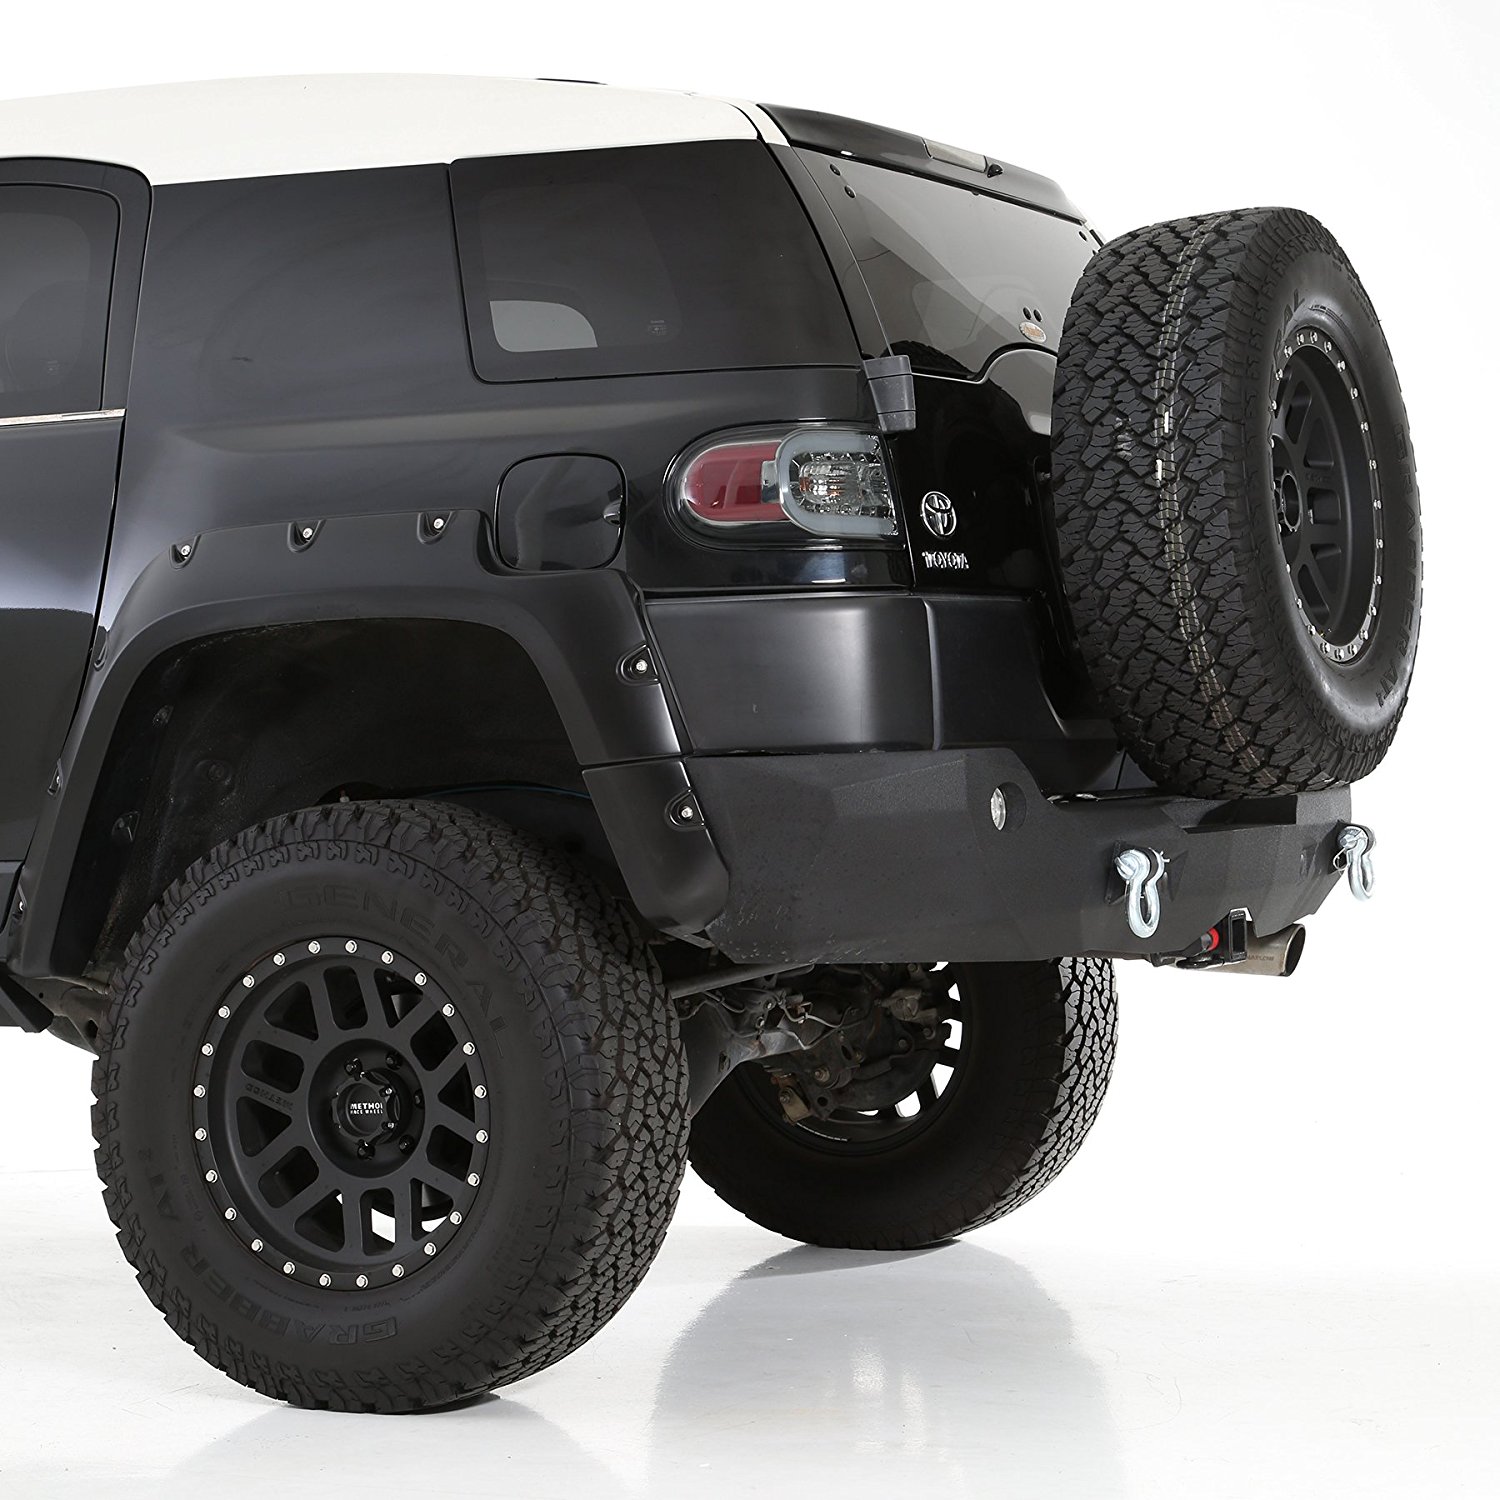 Smittybilt M1 Toyota Fjcruiser Rear Bumper With D Ring Mounts And